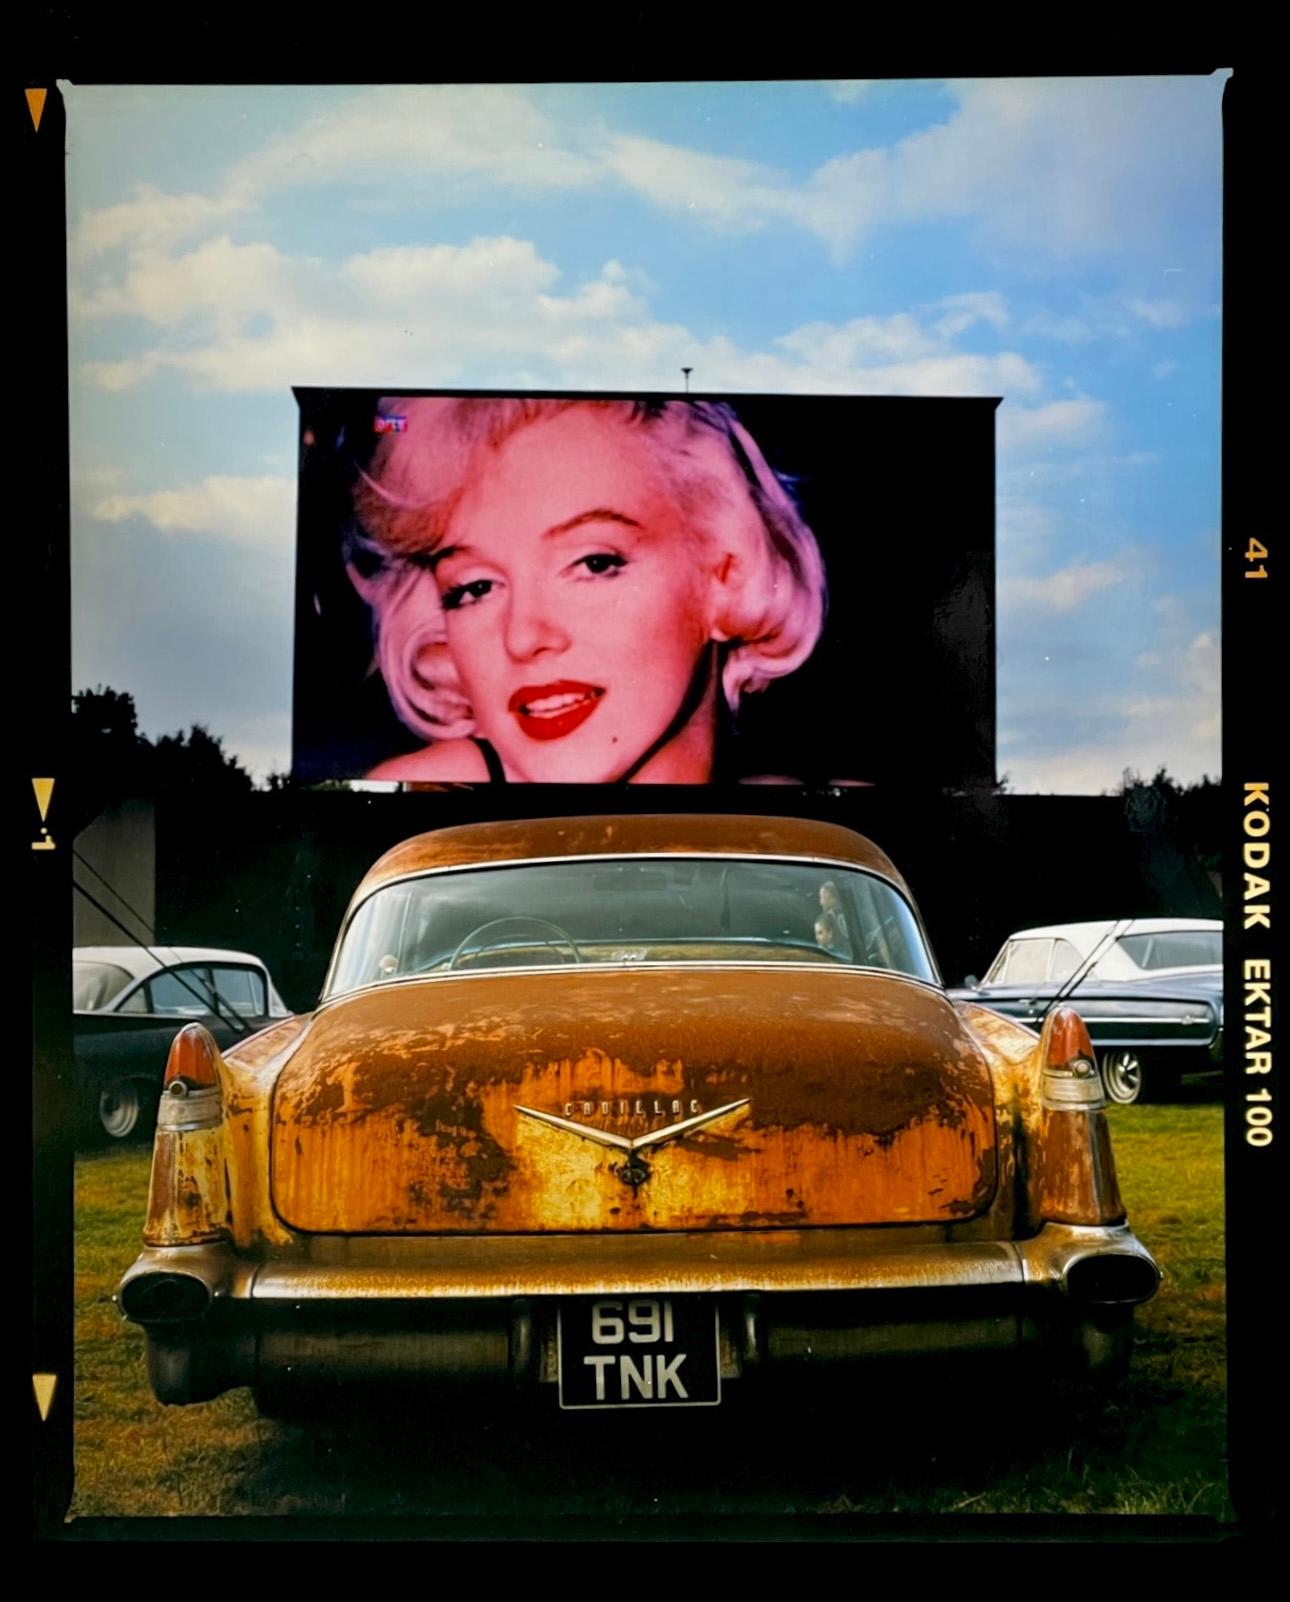 Richard Heeps Still-Life Photograph – Cadillac at the Drive-In, Goodwood – Vintage-Lifestyle-Farbfotografie